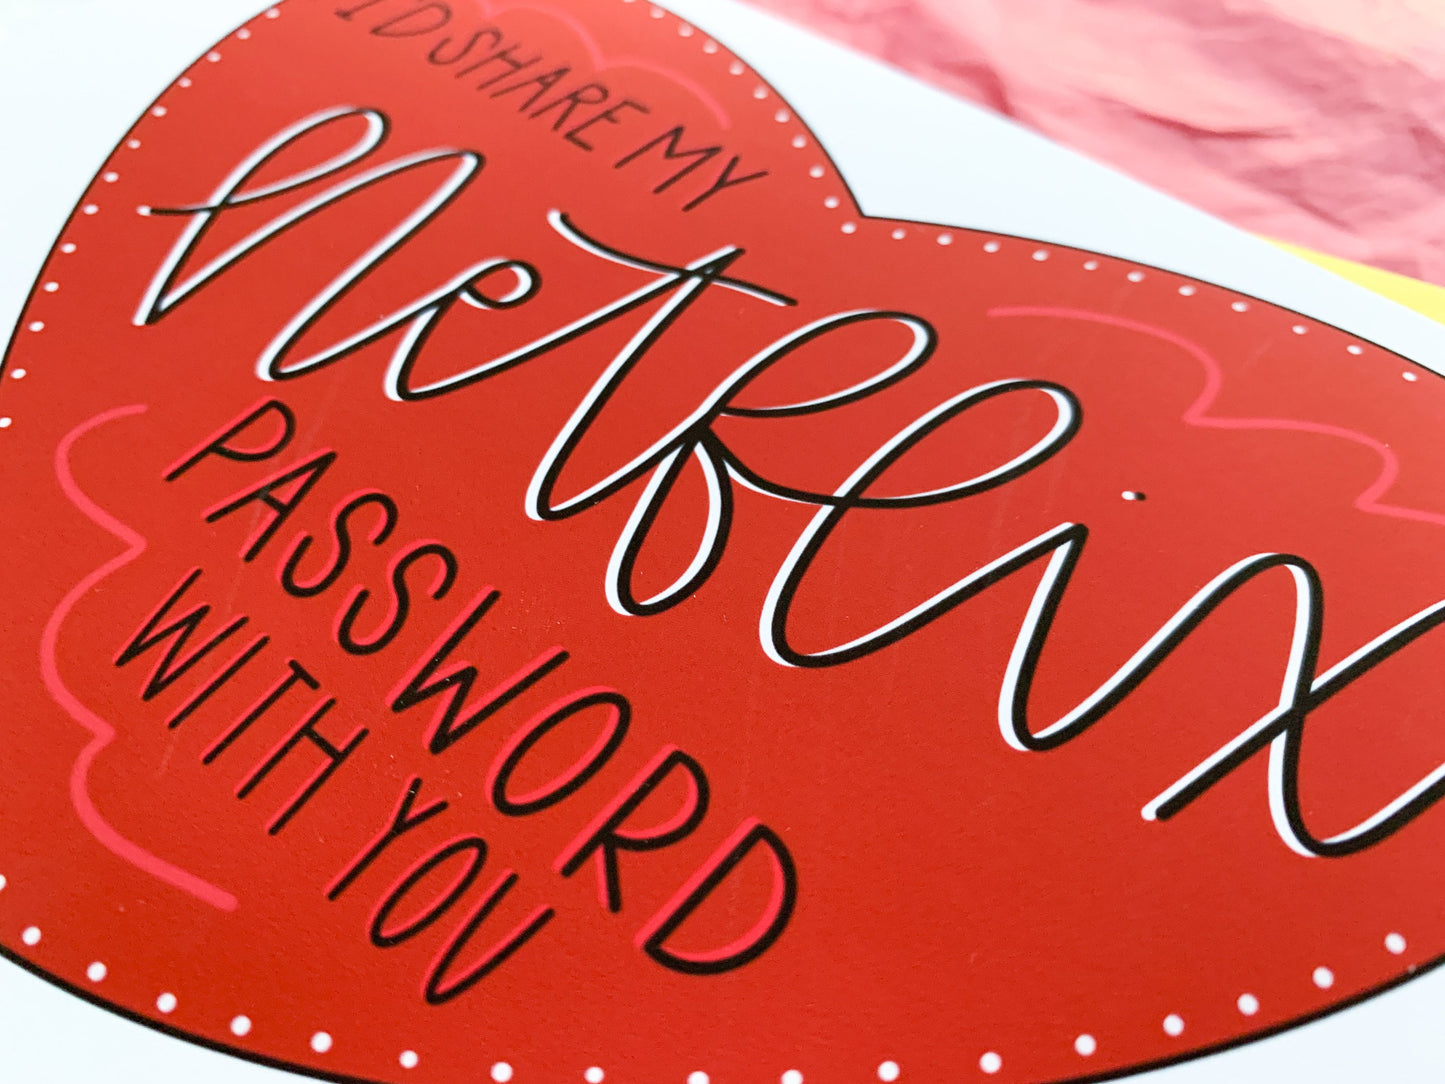 I'd Share My Netflix Password with You Handmade Valentine Card by StoneDonut Design